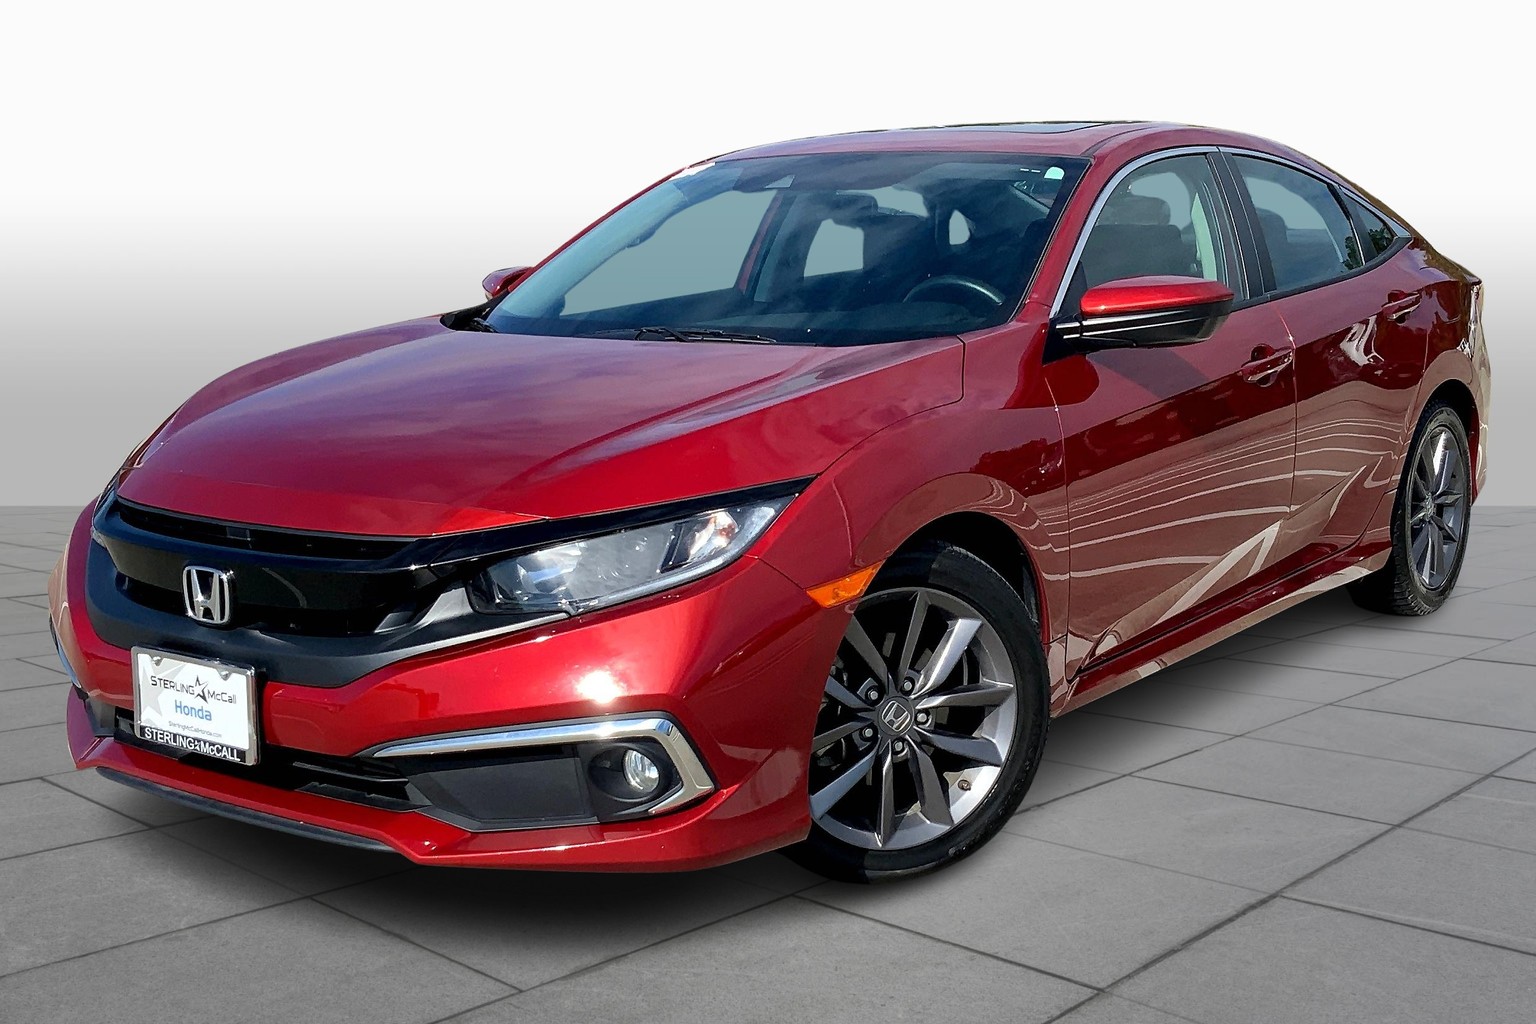 Pre-Owned Honda Civic for sale in Houston